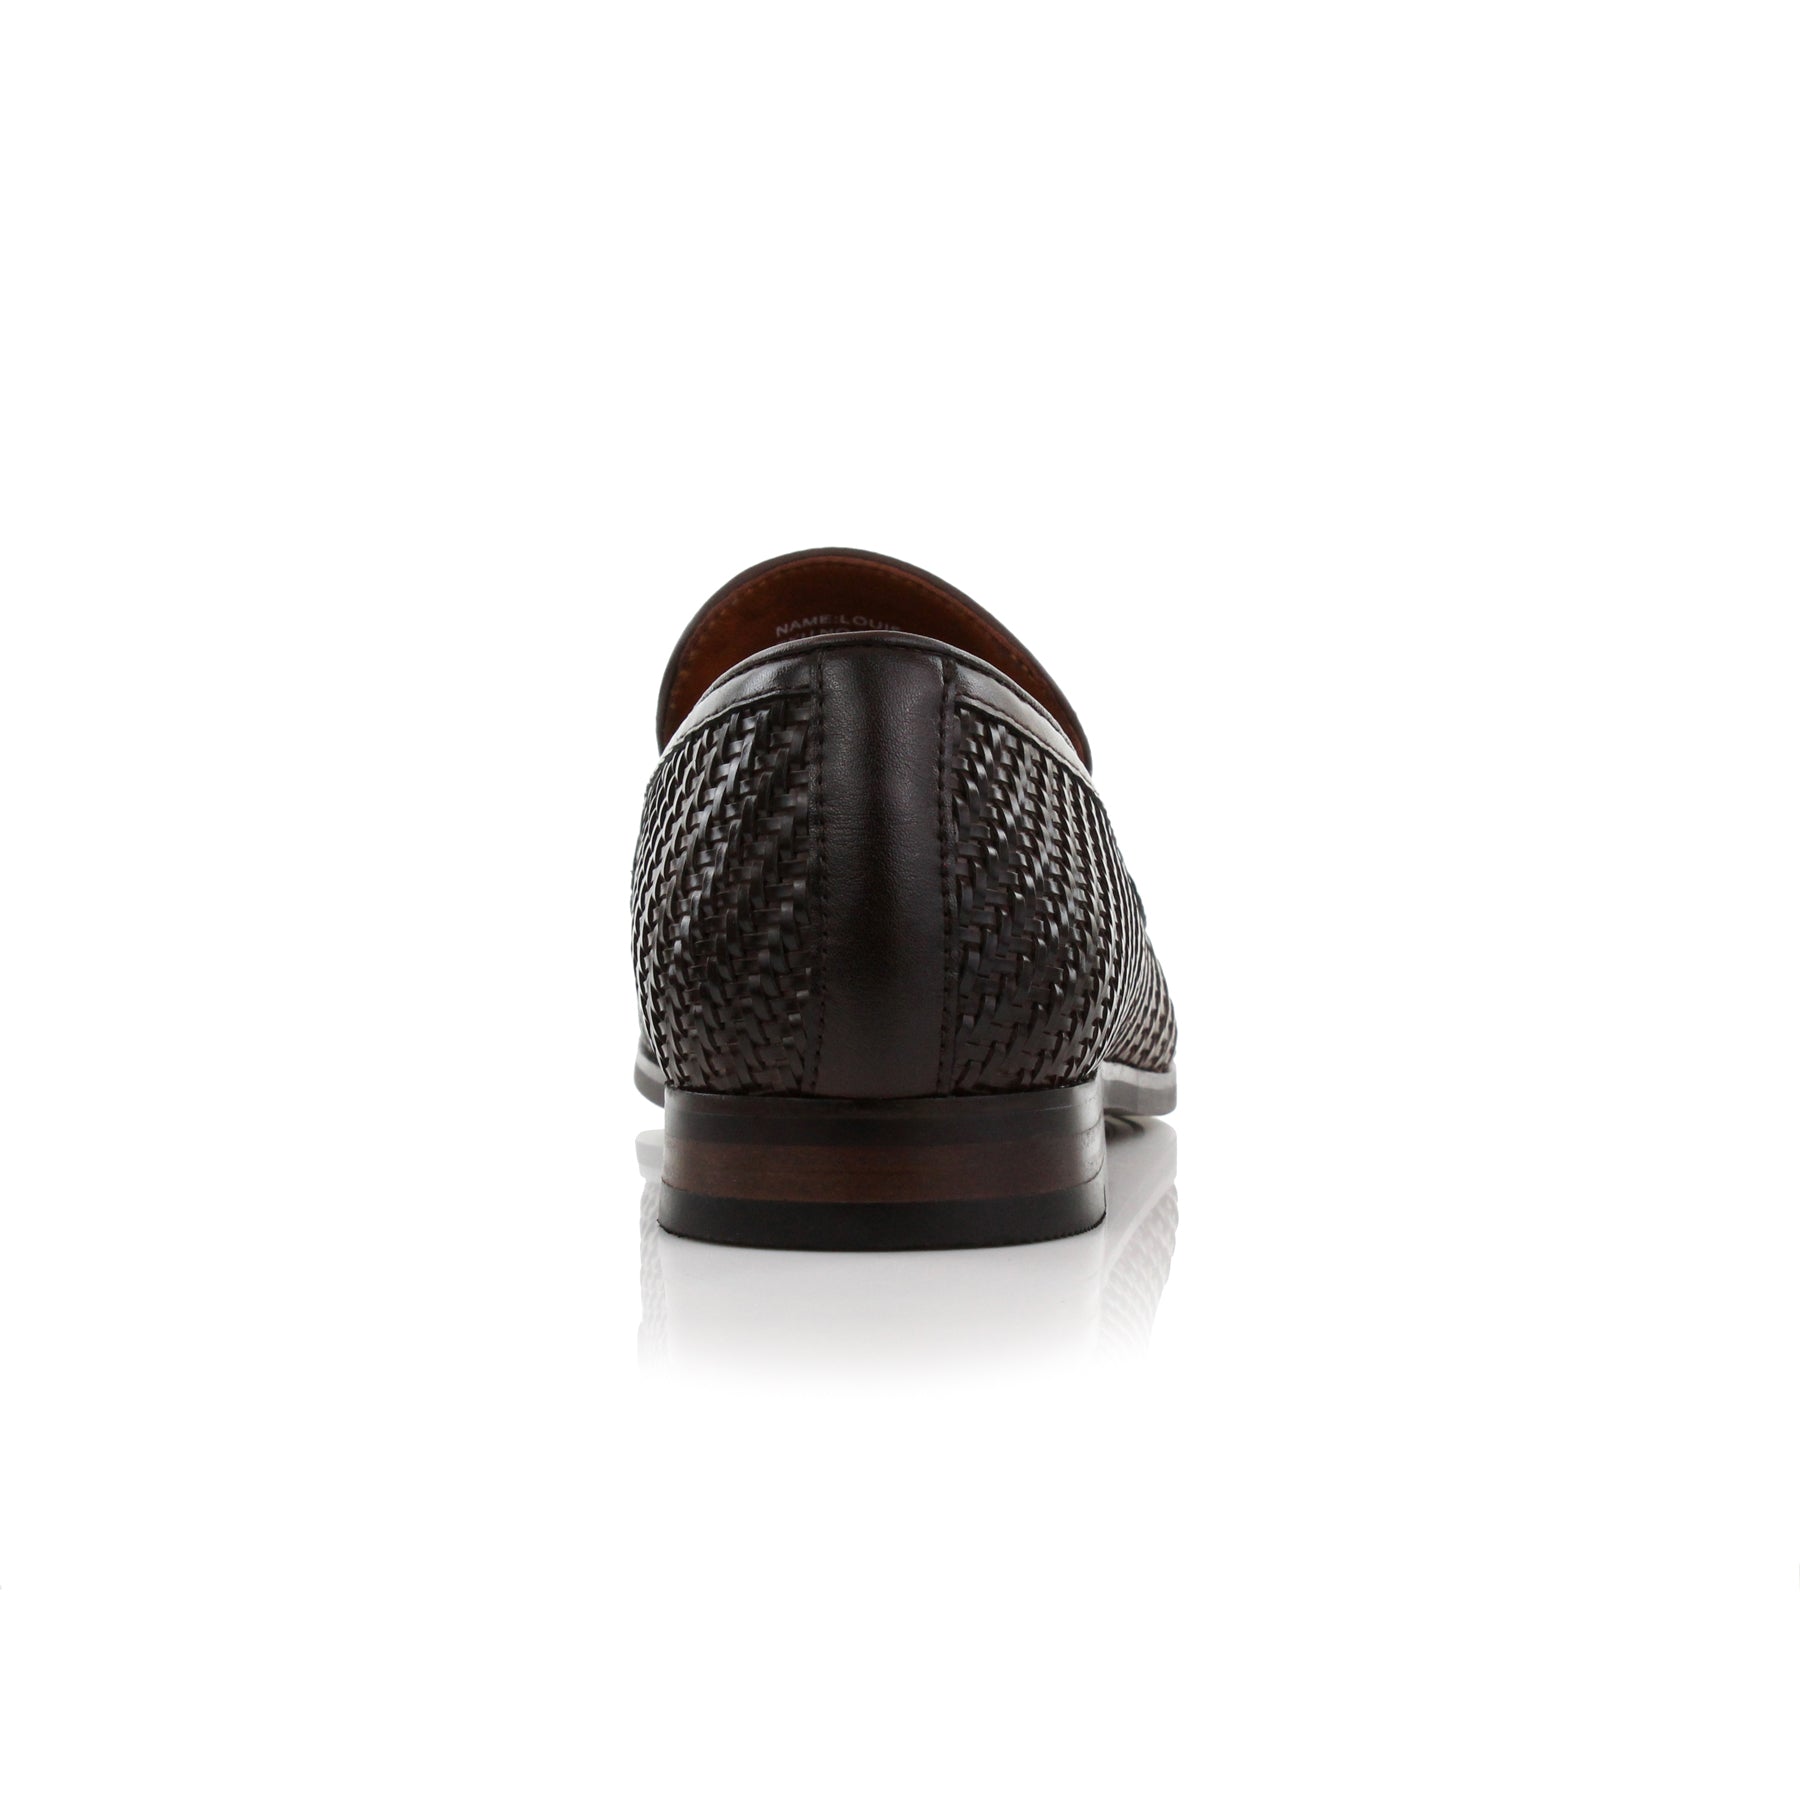 Burnished Woven Loafers | Louie by Ferro Aldo | Conal Footwear | Back Angle View